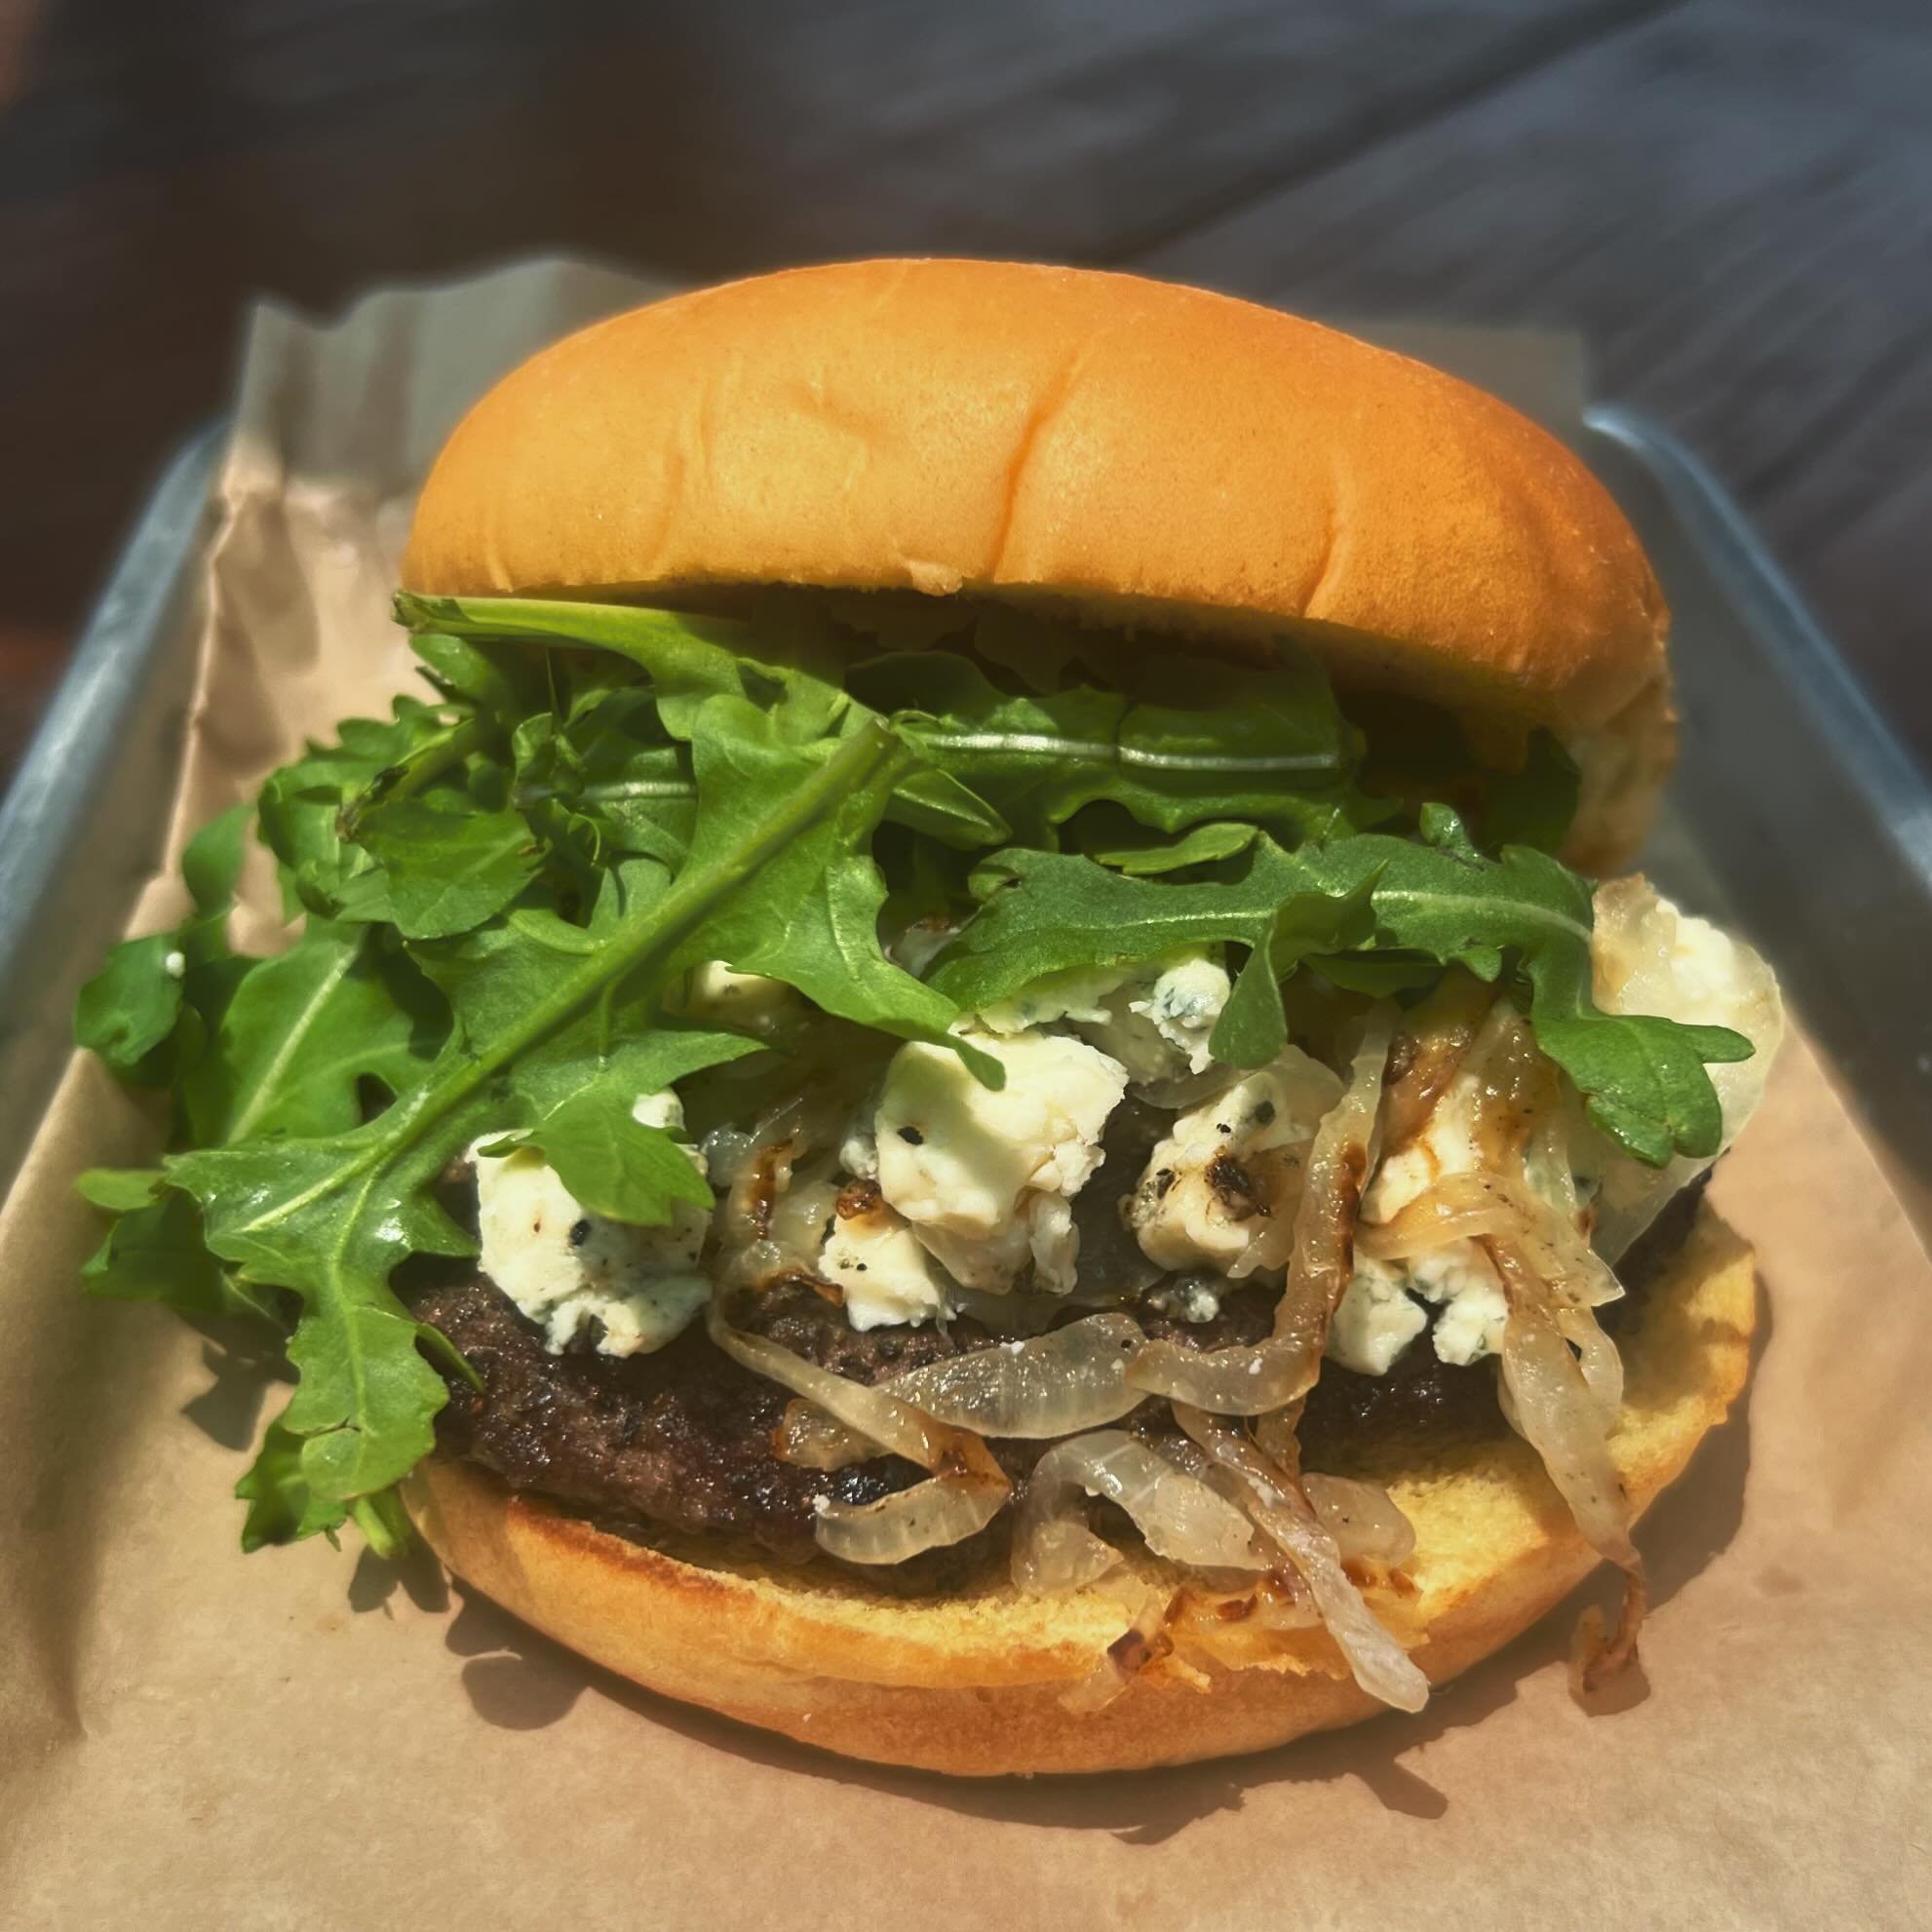 Burger special of the month.
&ldquo;The blue&rdquo;: beef patty seasoned with activated charcoal seasoning, topped with blue cheese, arugula and caramelized vidalia onions on a potato bun.